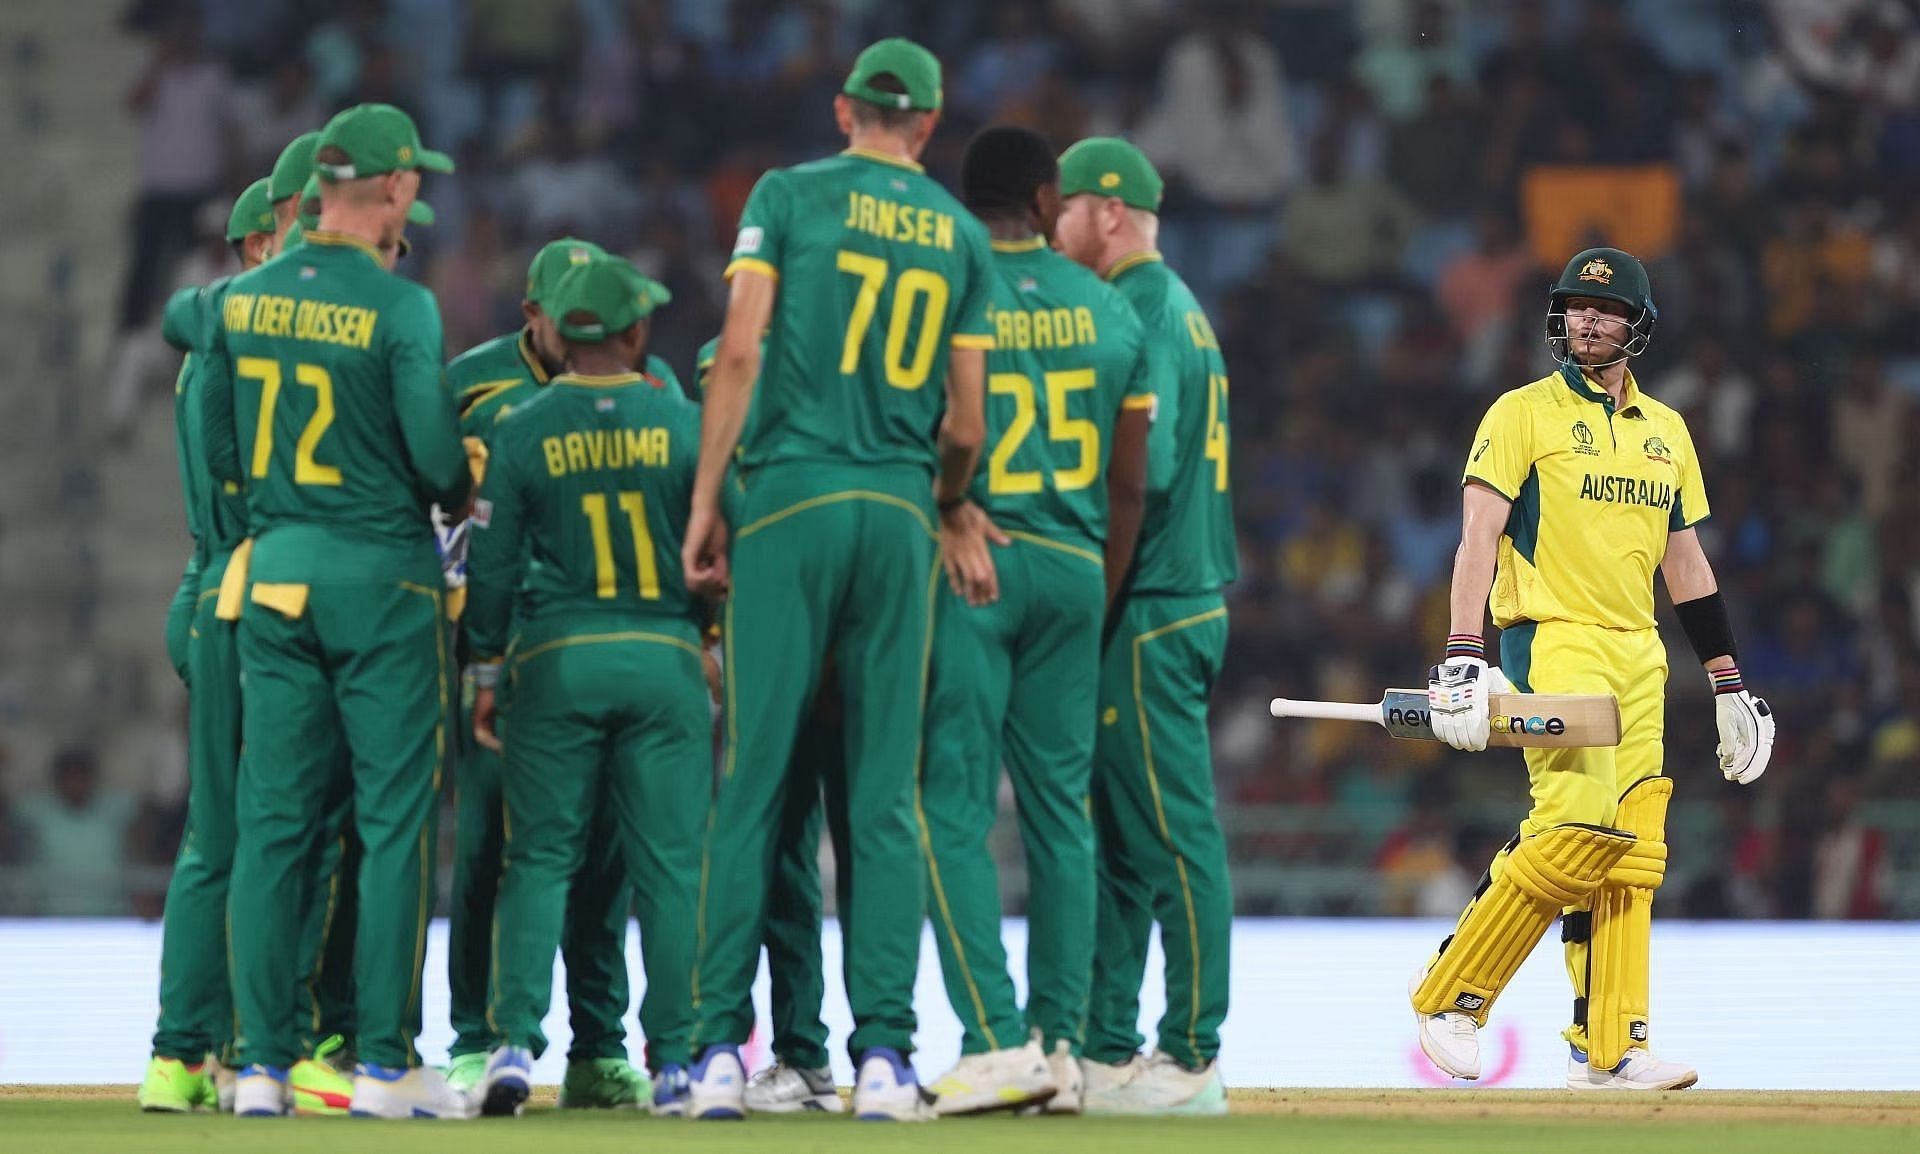 South Africa thrashed Australia by 134 runs in the league phase. [P/C: AP]